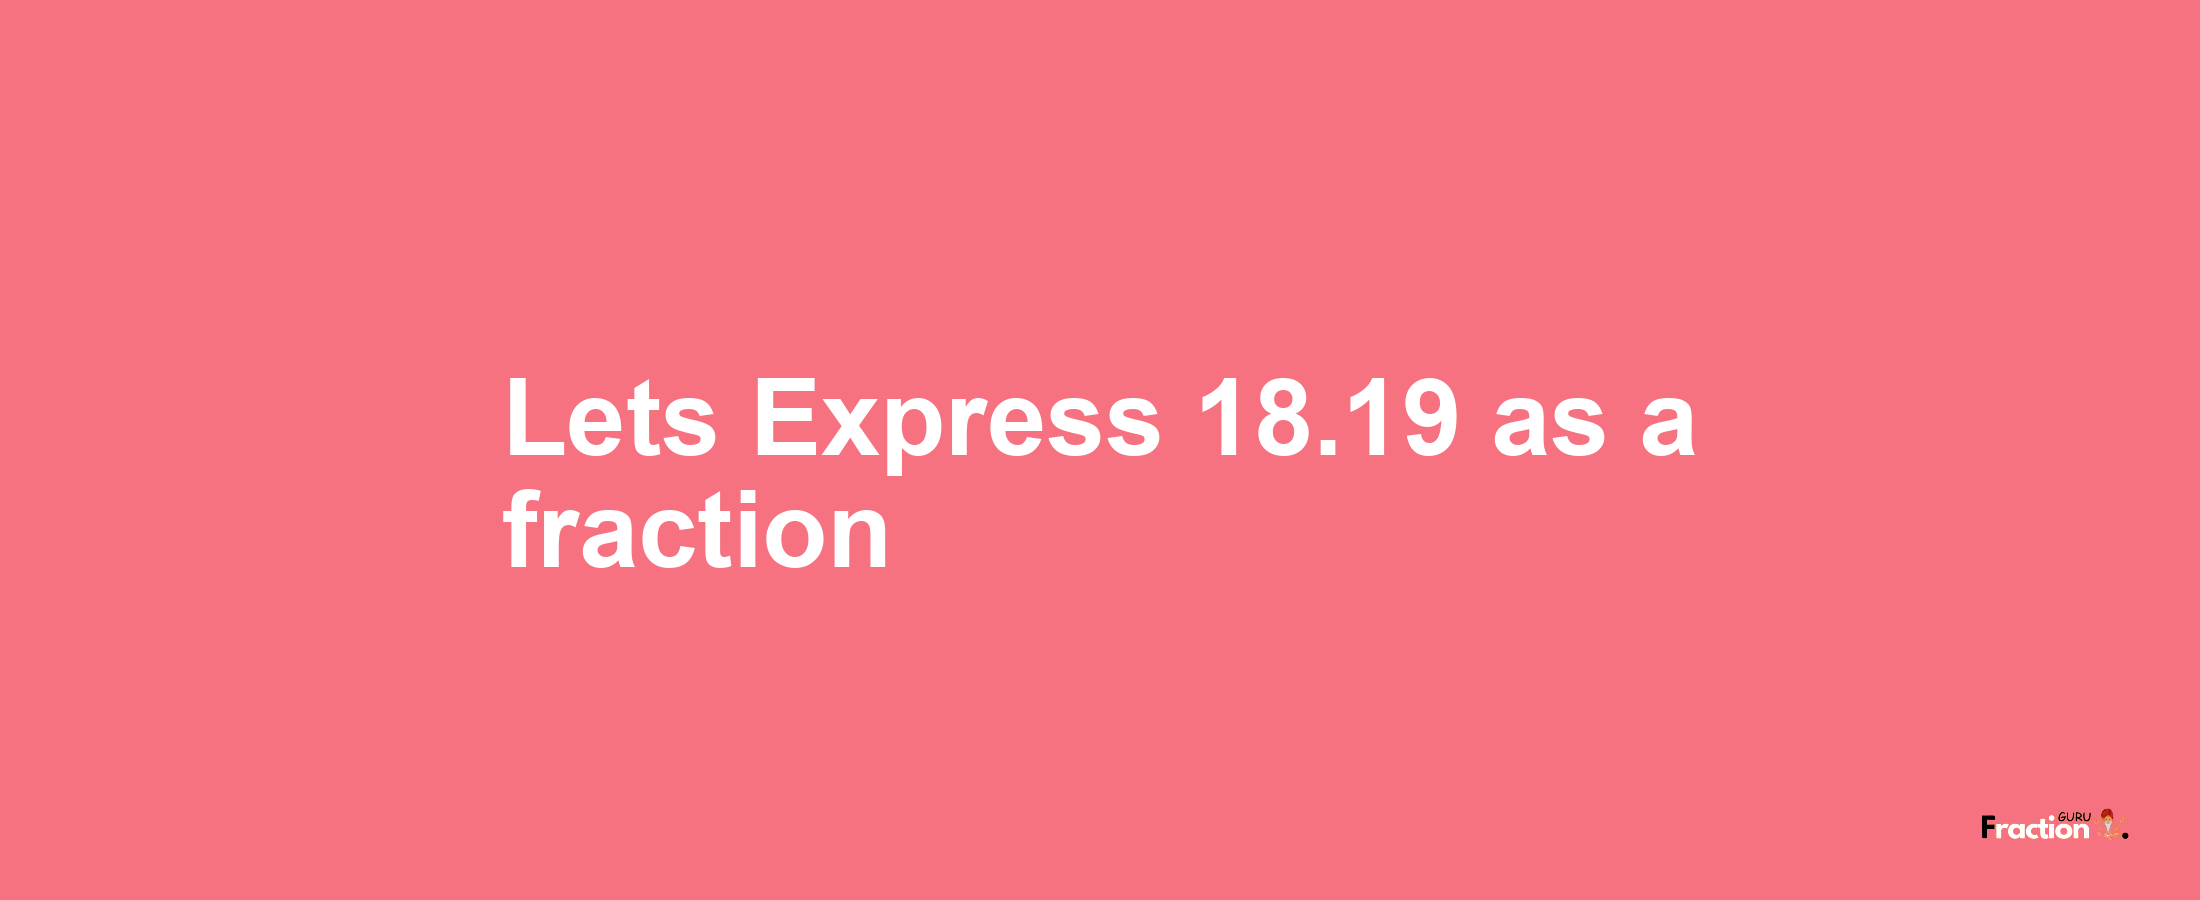 Lets Express 18.19 as afraction